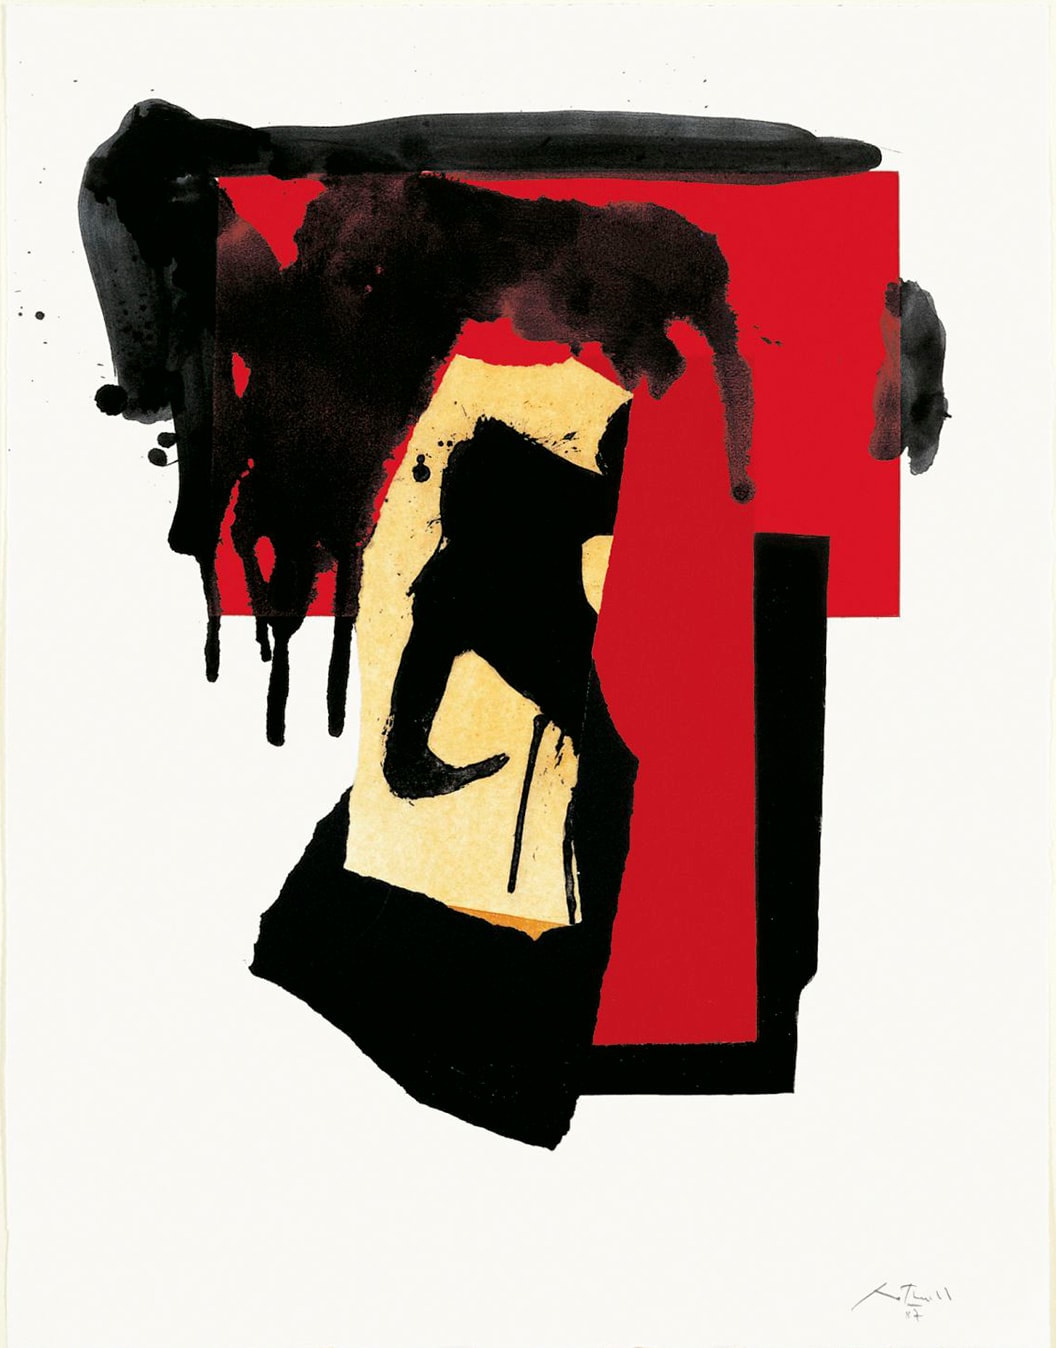 Robert Motherwell, RED AND BLACK NO. 4, THE, 1987-88